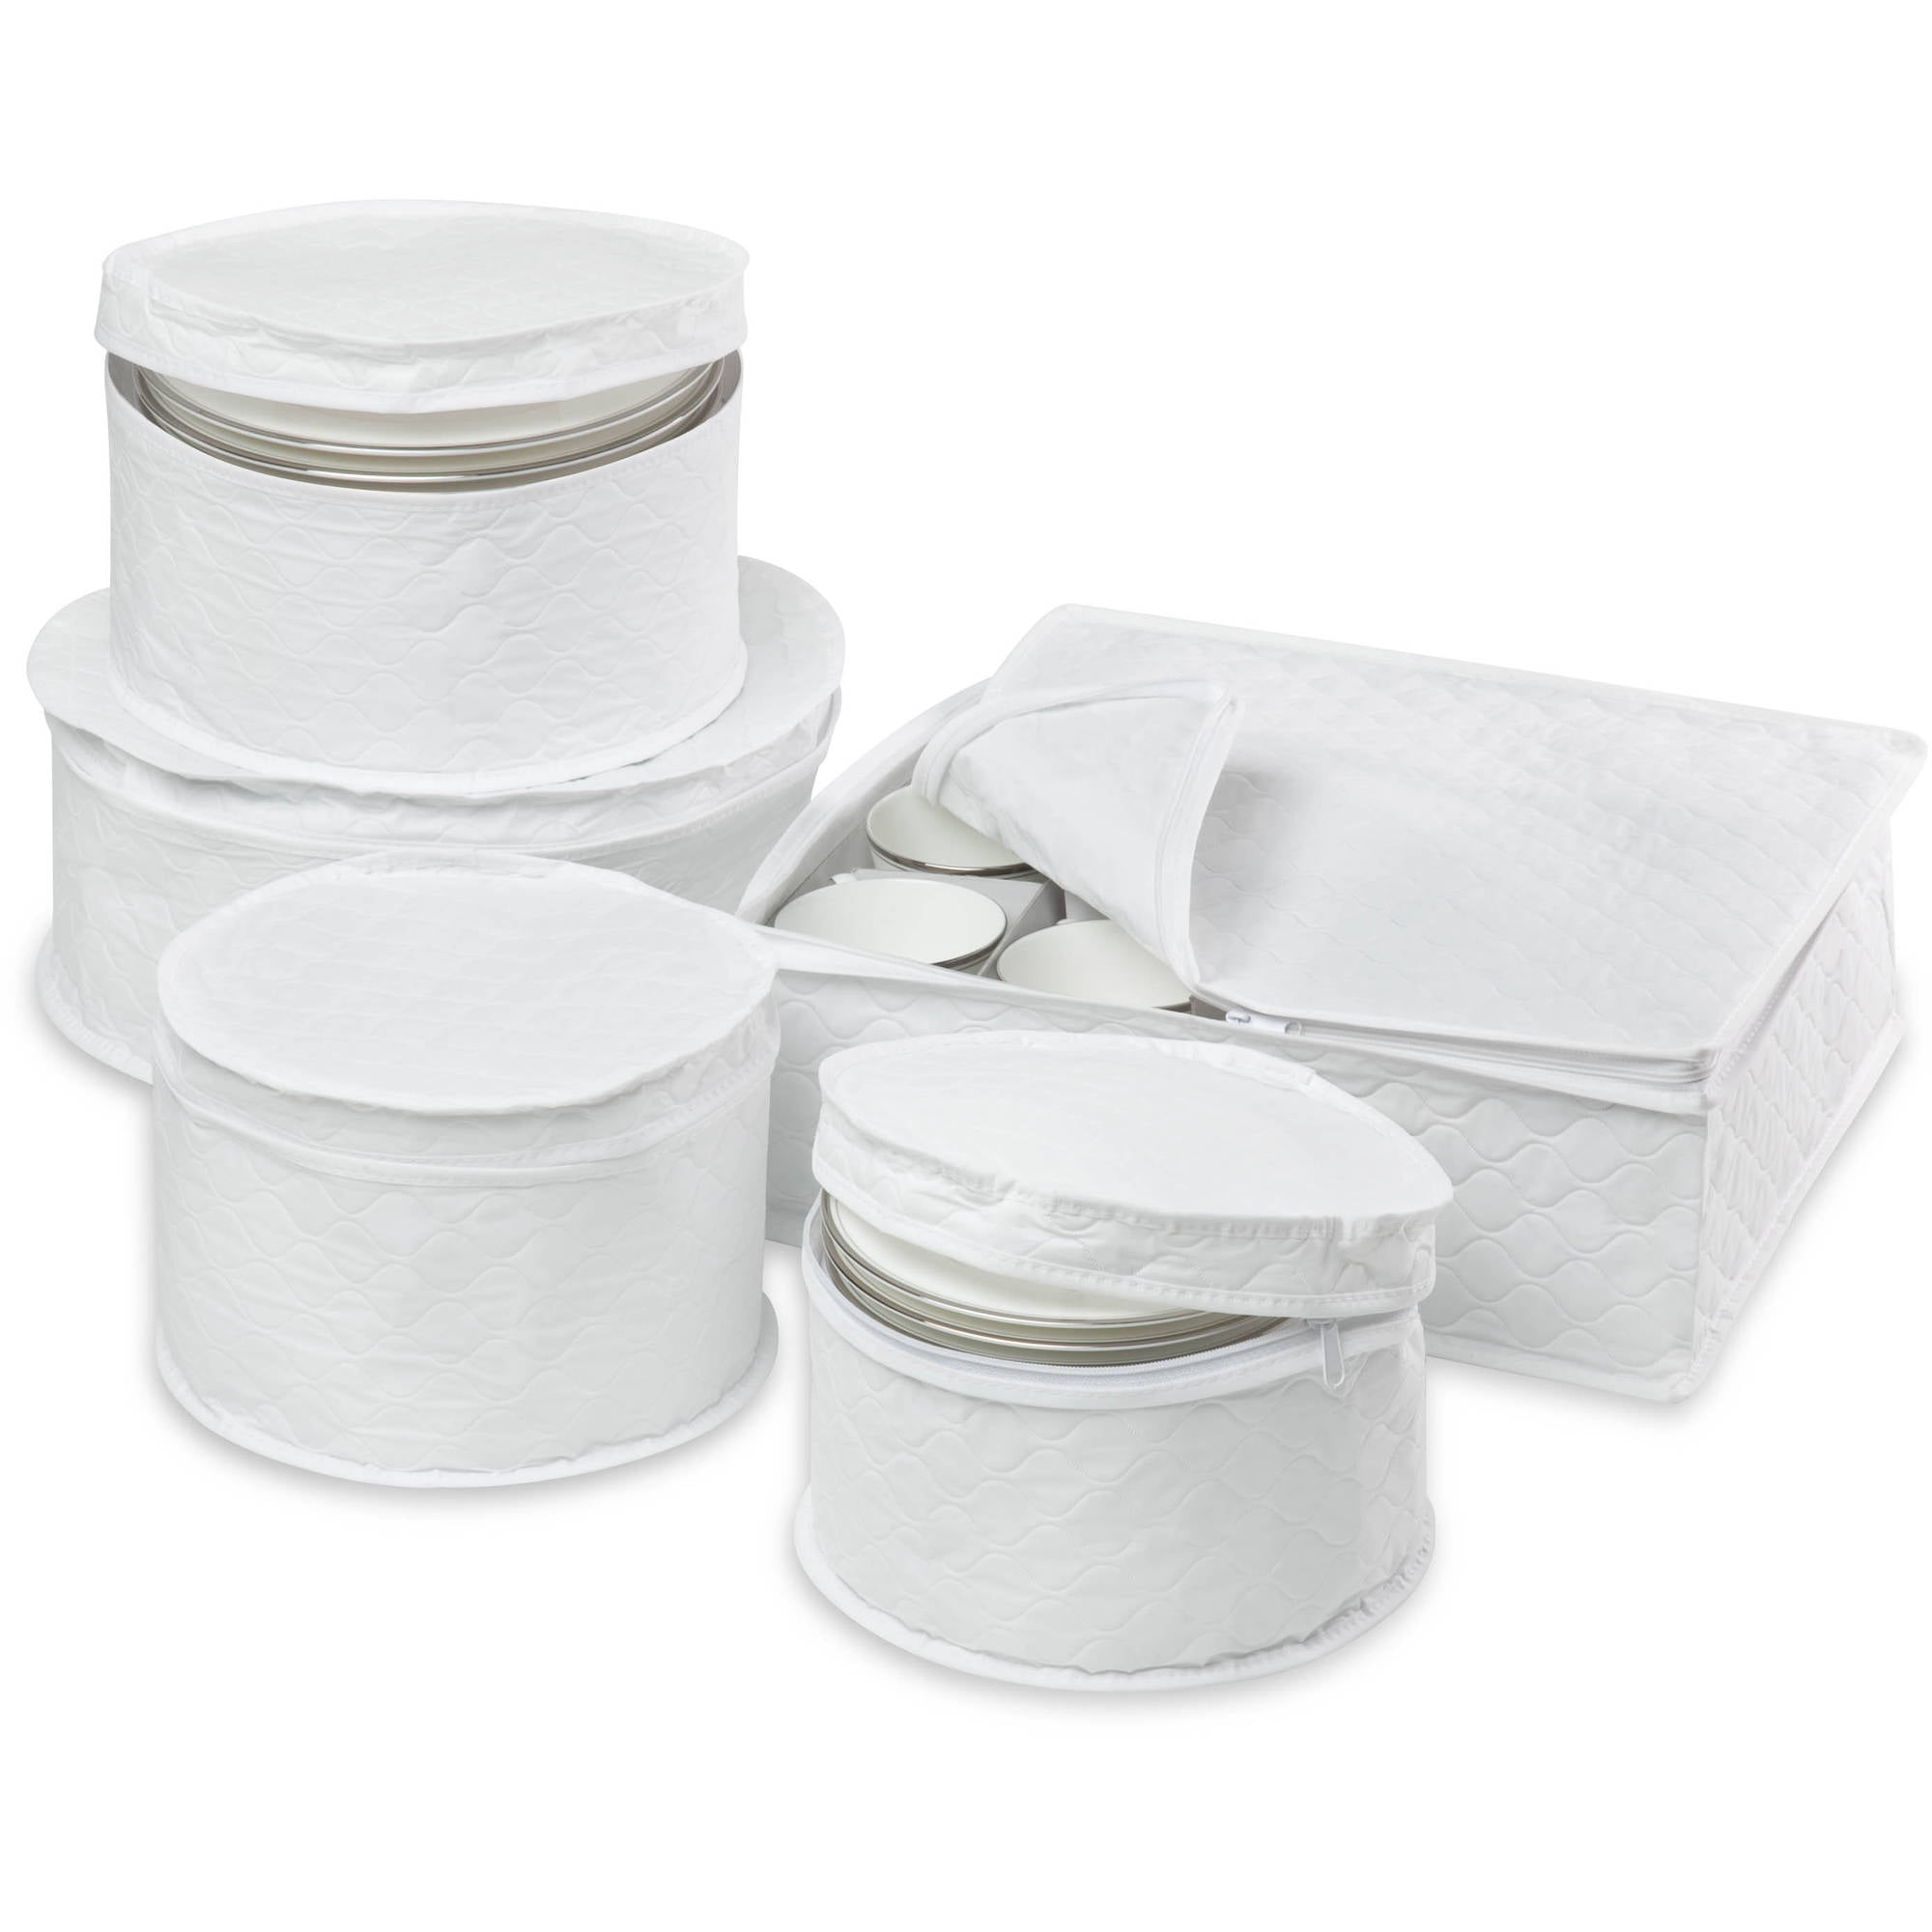 StorageBud 6pc Dinnerware Storage Container Set with Dividers, for Plate,  Cup, Flatware, Stemware, & Platter Sets, Securely Padded, Hard Shell &  Stackable, Handles & Zippers for Transport 